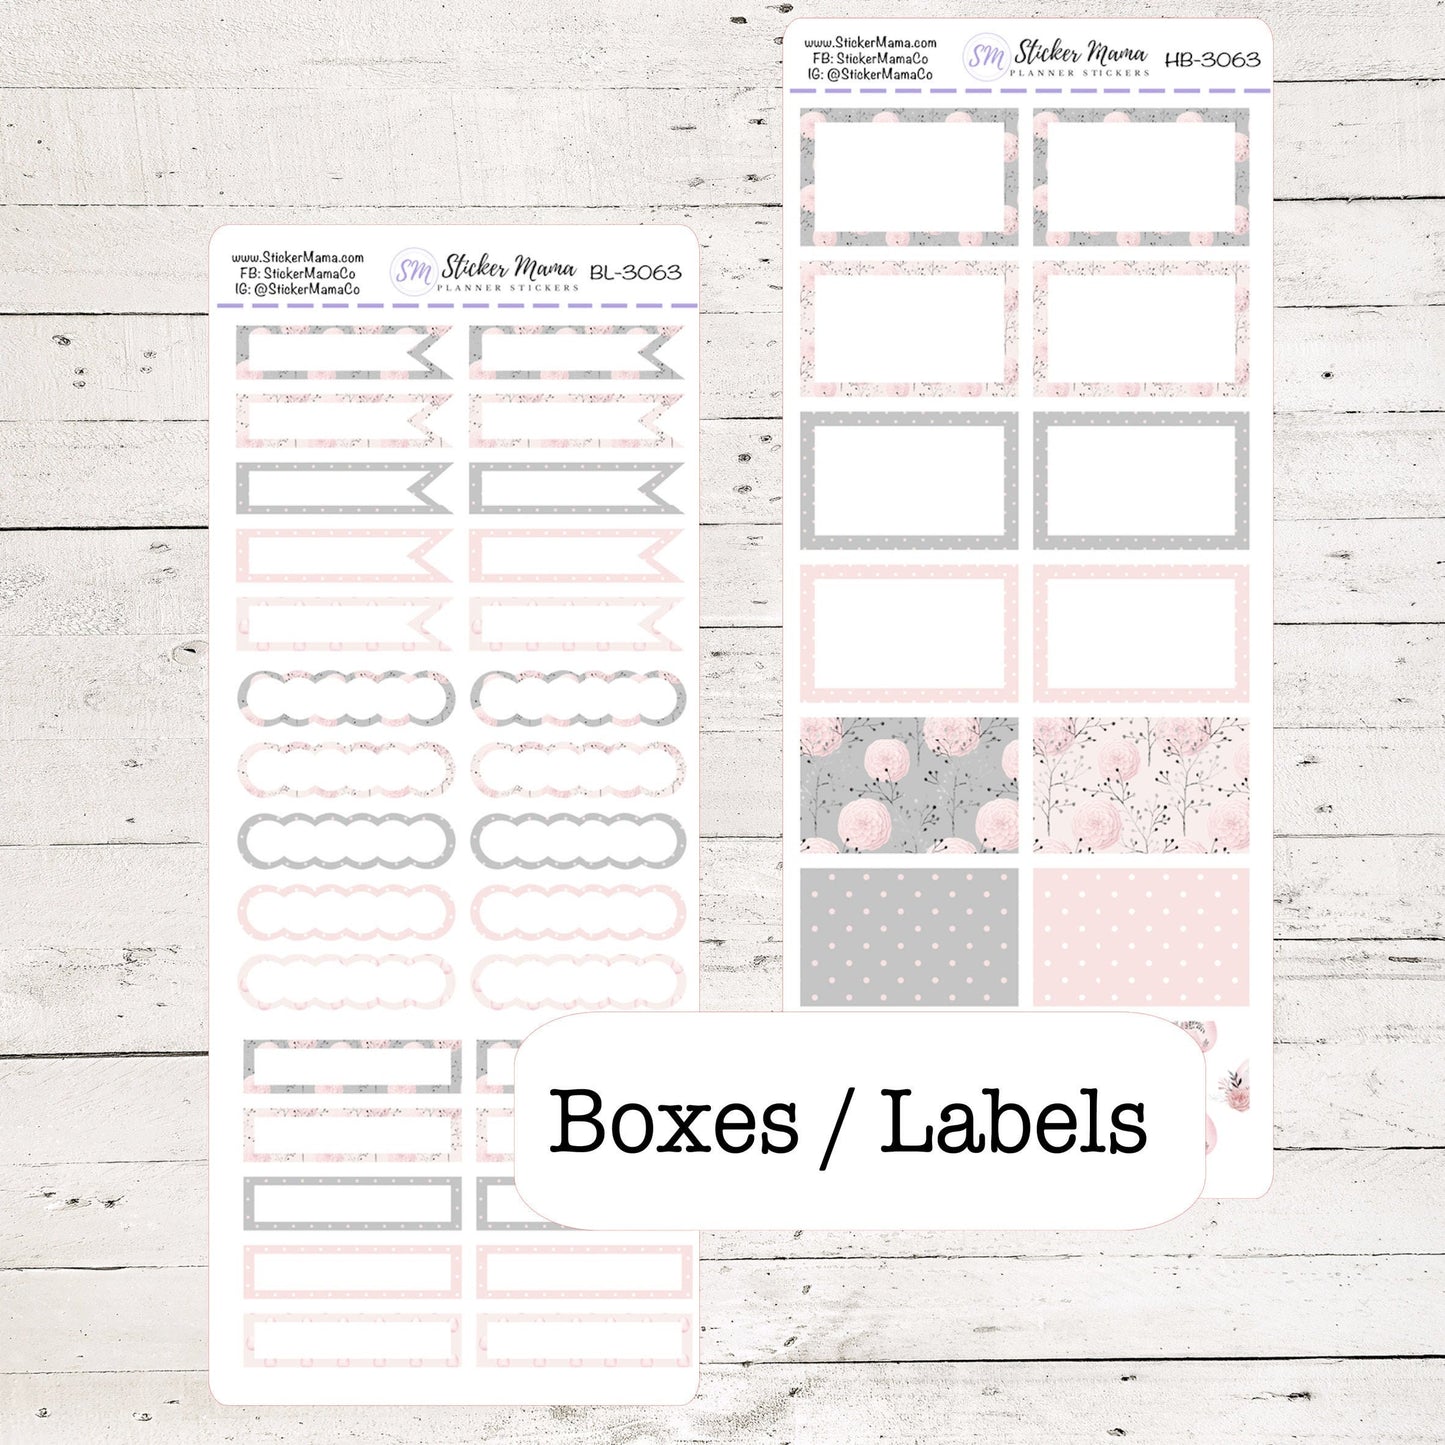 BL-3063 - HB-3063 BASIC Label Stickers - Easter - Half Boxes - Planner Stickers - Full Box for Planners